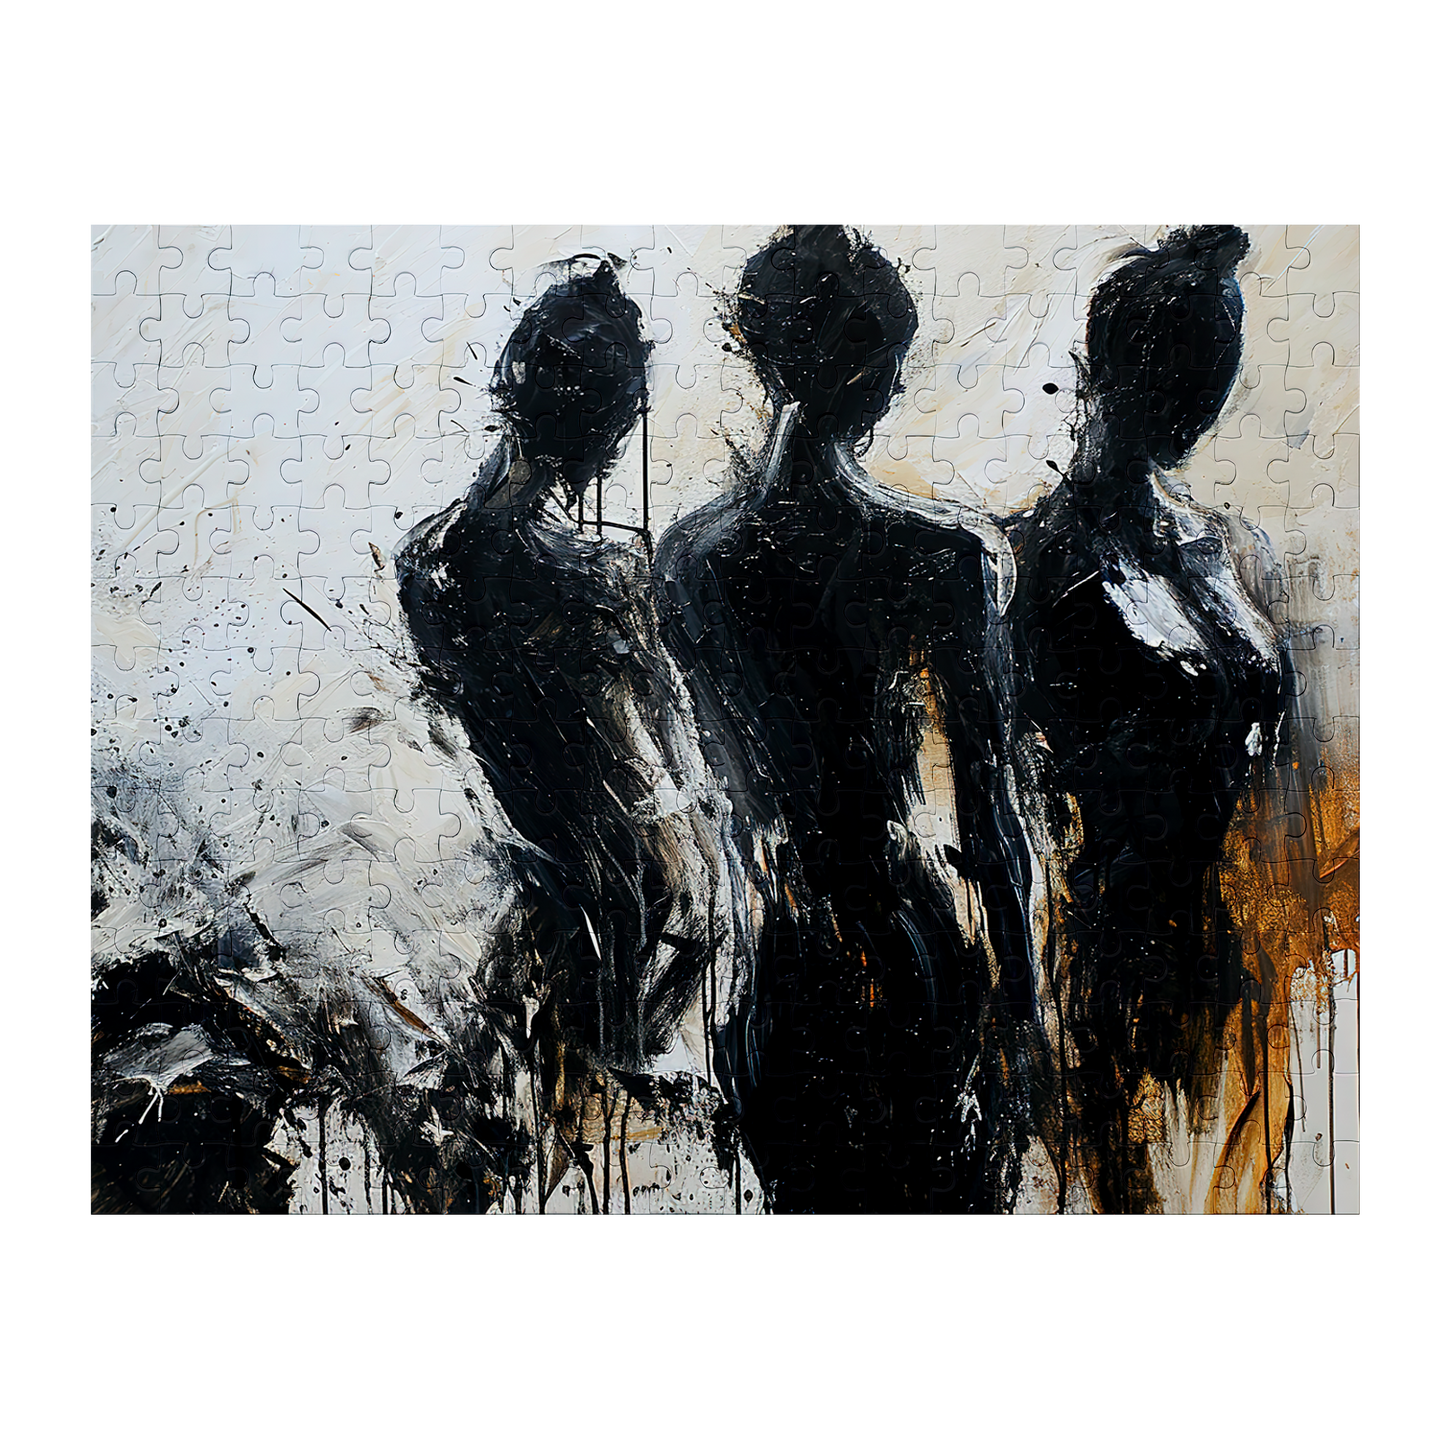 Trio - Premium Jigsaw Puzzle - Abstract, Dynamic, Black and White, Classic - Multiple Sizes Available